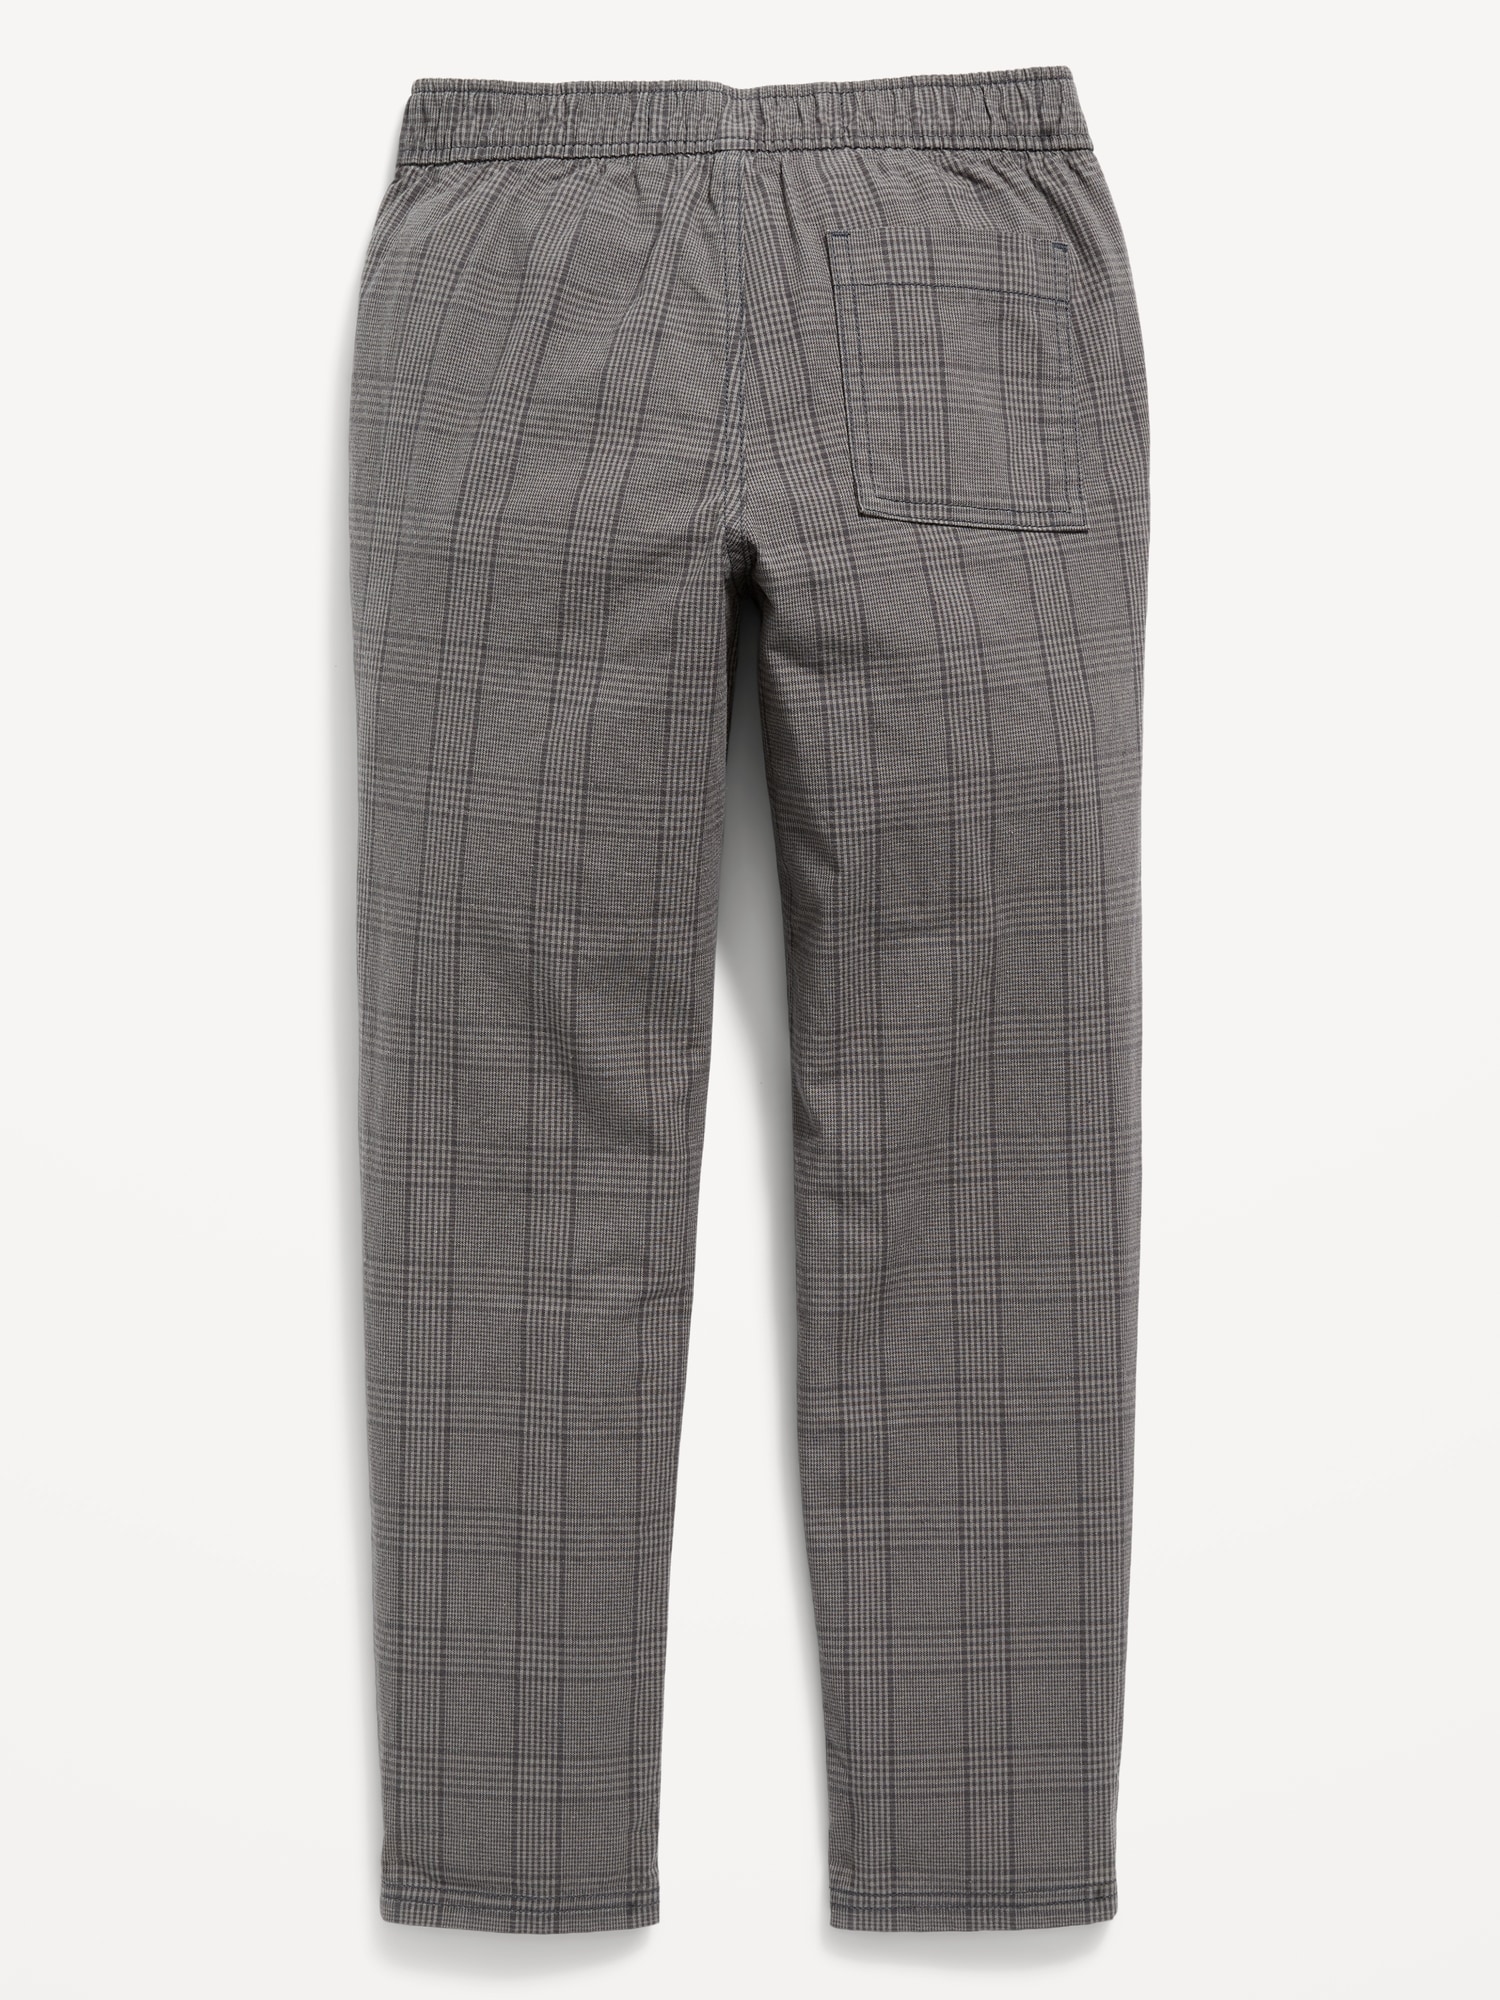 Textured Patterned Built-In Flex Taper Pants for Boys | Old Navy